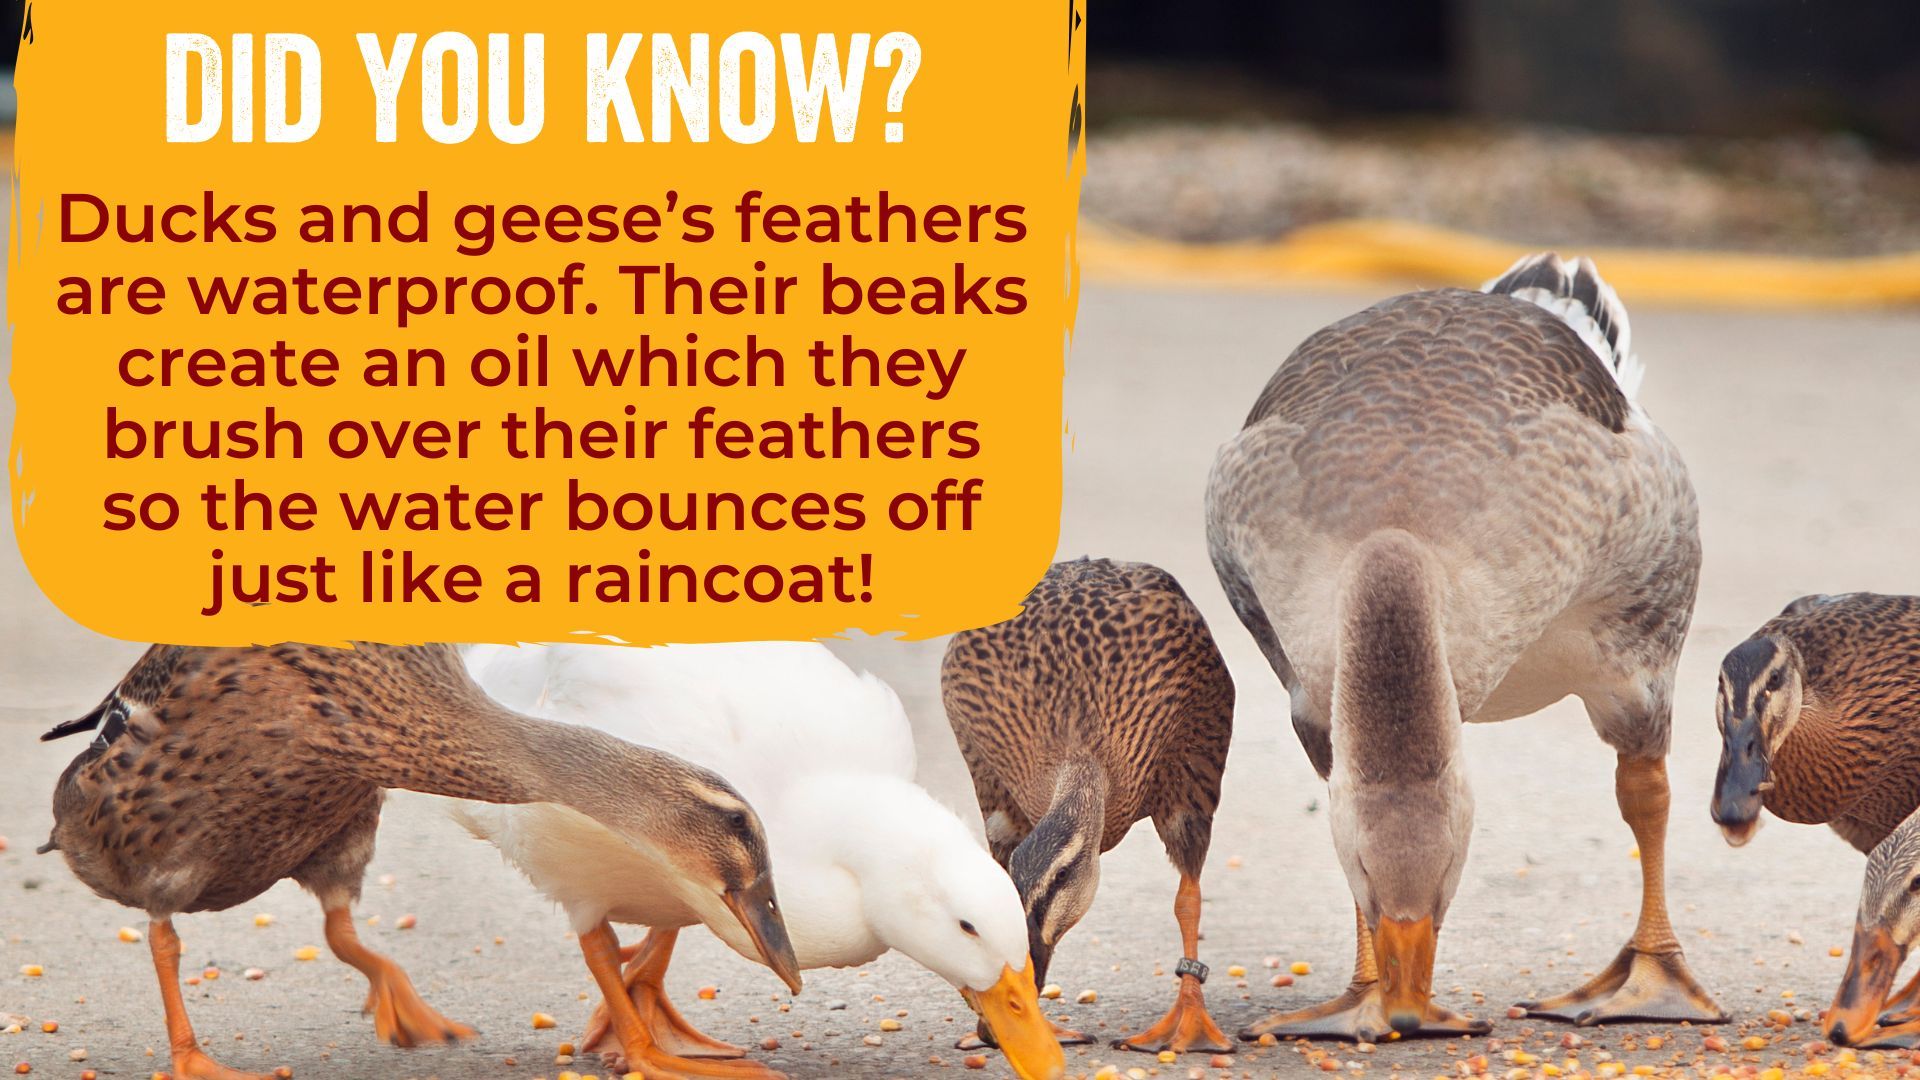 Ducks and geese’s feathers are waterproof. Their beaks create an oil which they brush over their feathers so the water bounces off just like a raincoat!